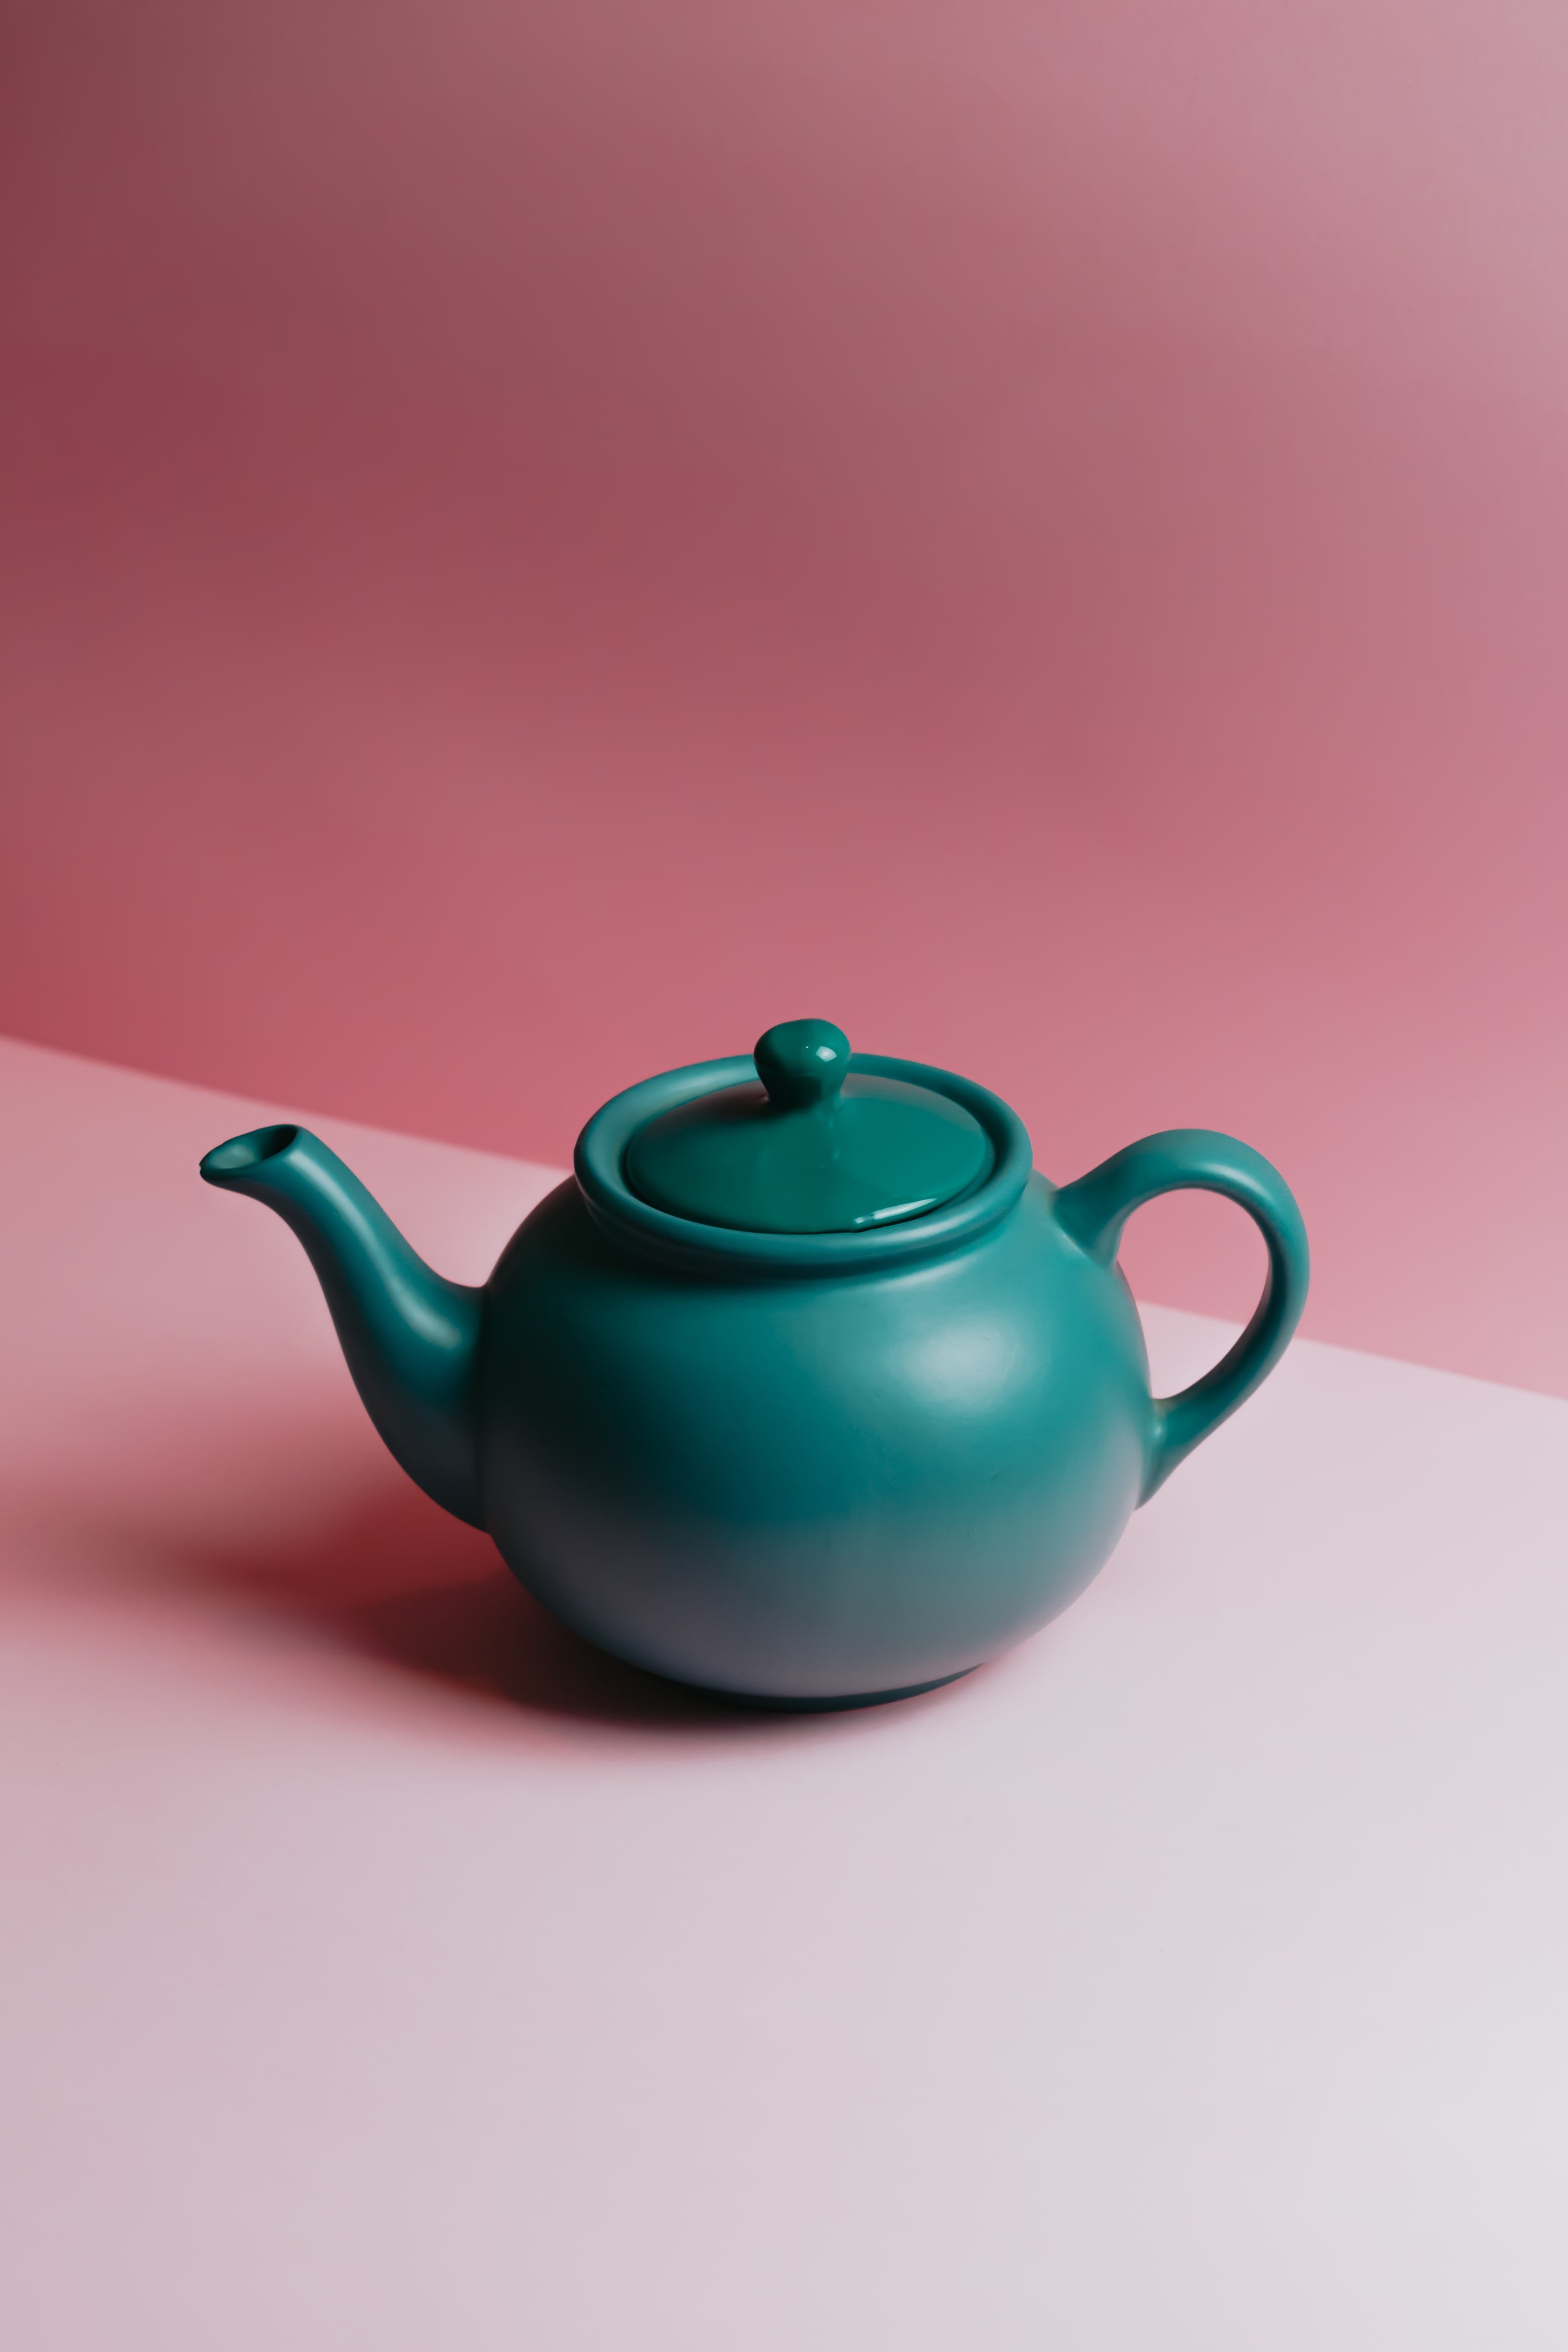 Teapot against a lit pink background.